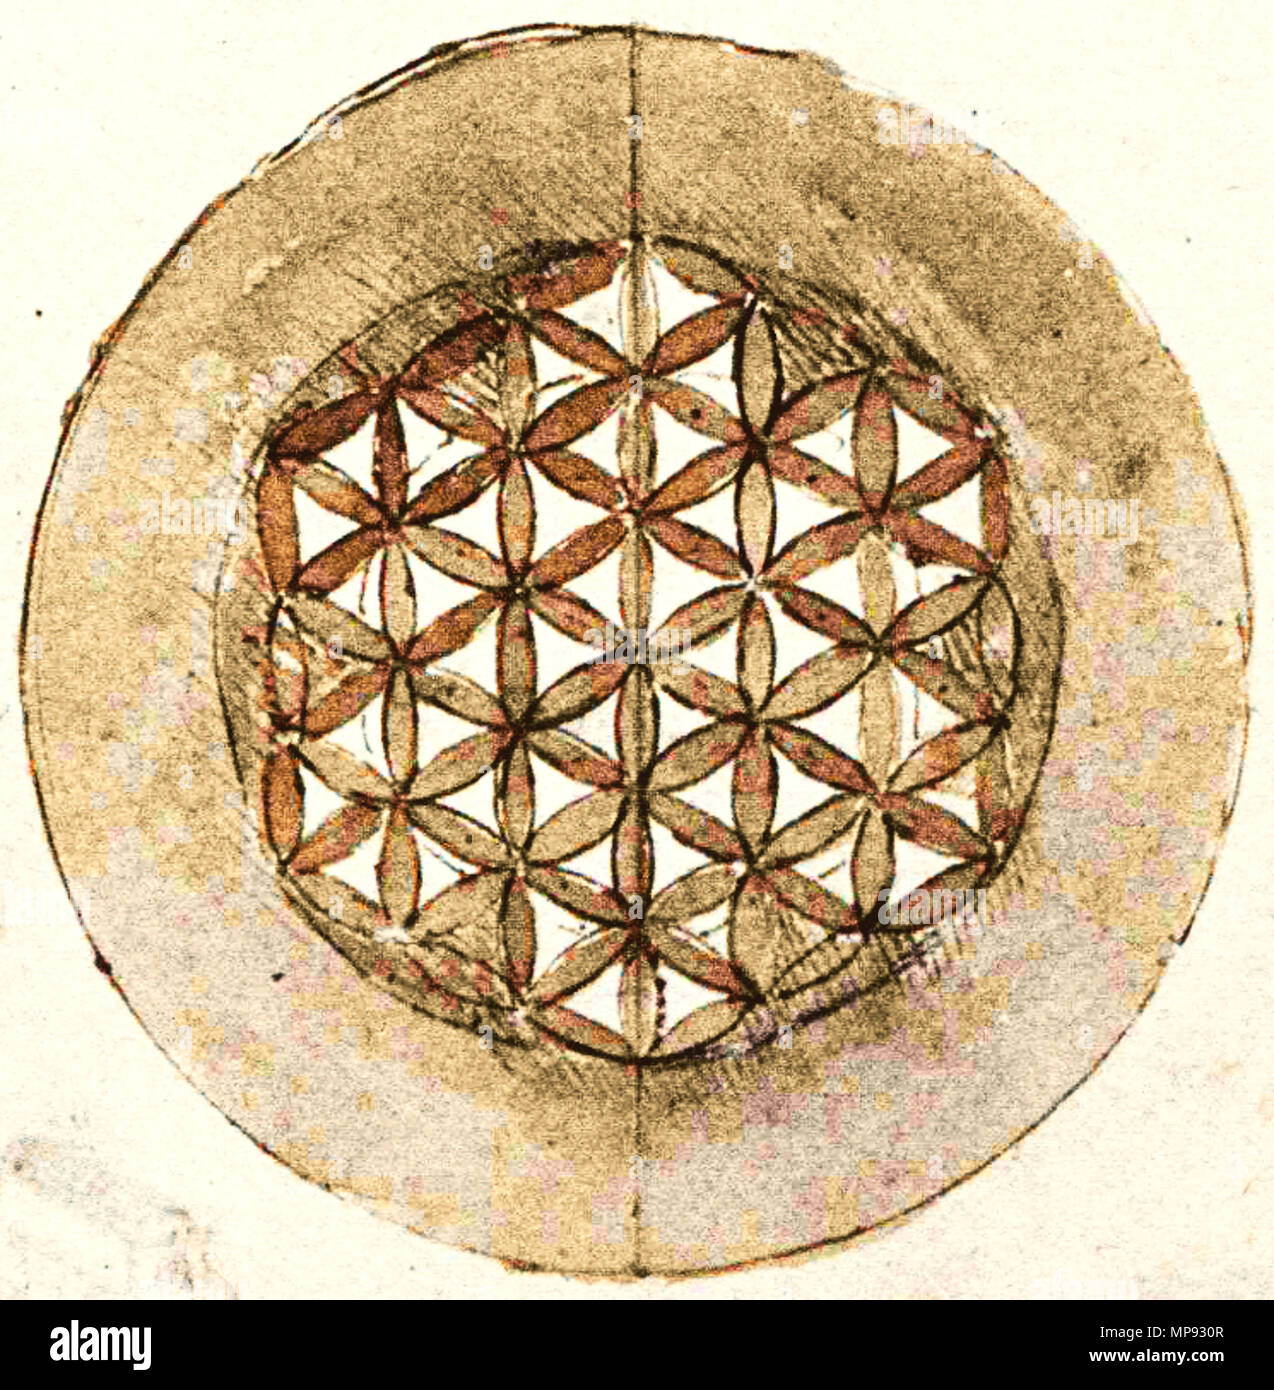 . English: This is a picture of one of Leonardo da Vinci's drawings of geometrical structures related to the ornamental structure named today “Flower of Life”. between 1478 and 1519.   Leonardo da Vinci  (1452–1519)       Alternative names Leonardo di ser Piero da Vinci, Leonardo  Description Italian painter, engineer, astronomer, philosopher, anatomist and mathematician  Date of birth/death 15 April 1452 2 May 1519  Location of birth/death Anchiano Clos Lucé  Work period from 1466 until 1519  Work location Florence (1466–1482), Milan (1483–1499), Mantua (1499), Venice (1500), Florence (1500–1 Stock Photo